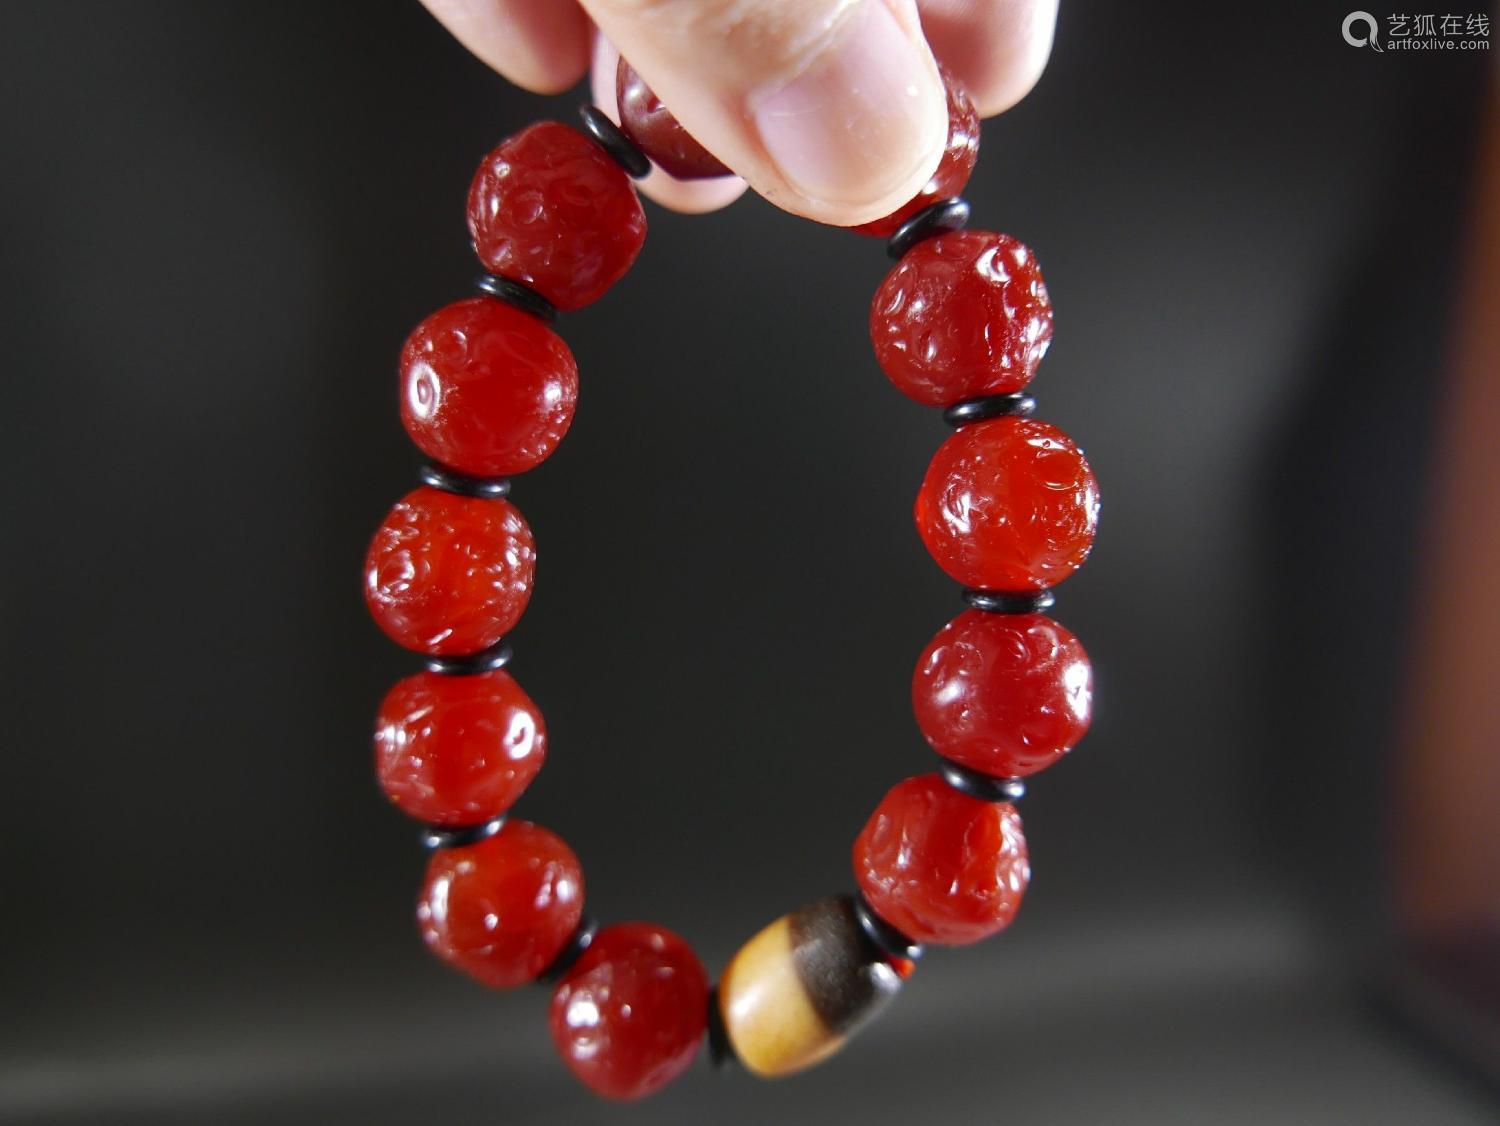 Natural women's hand gouging beads with Beads Bracelet